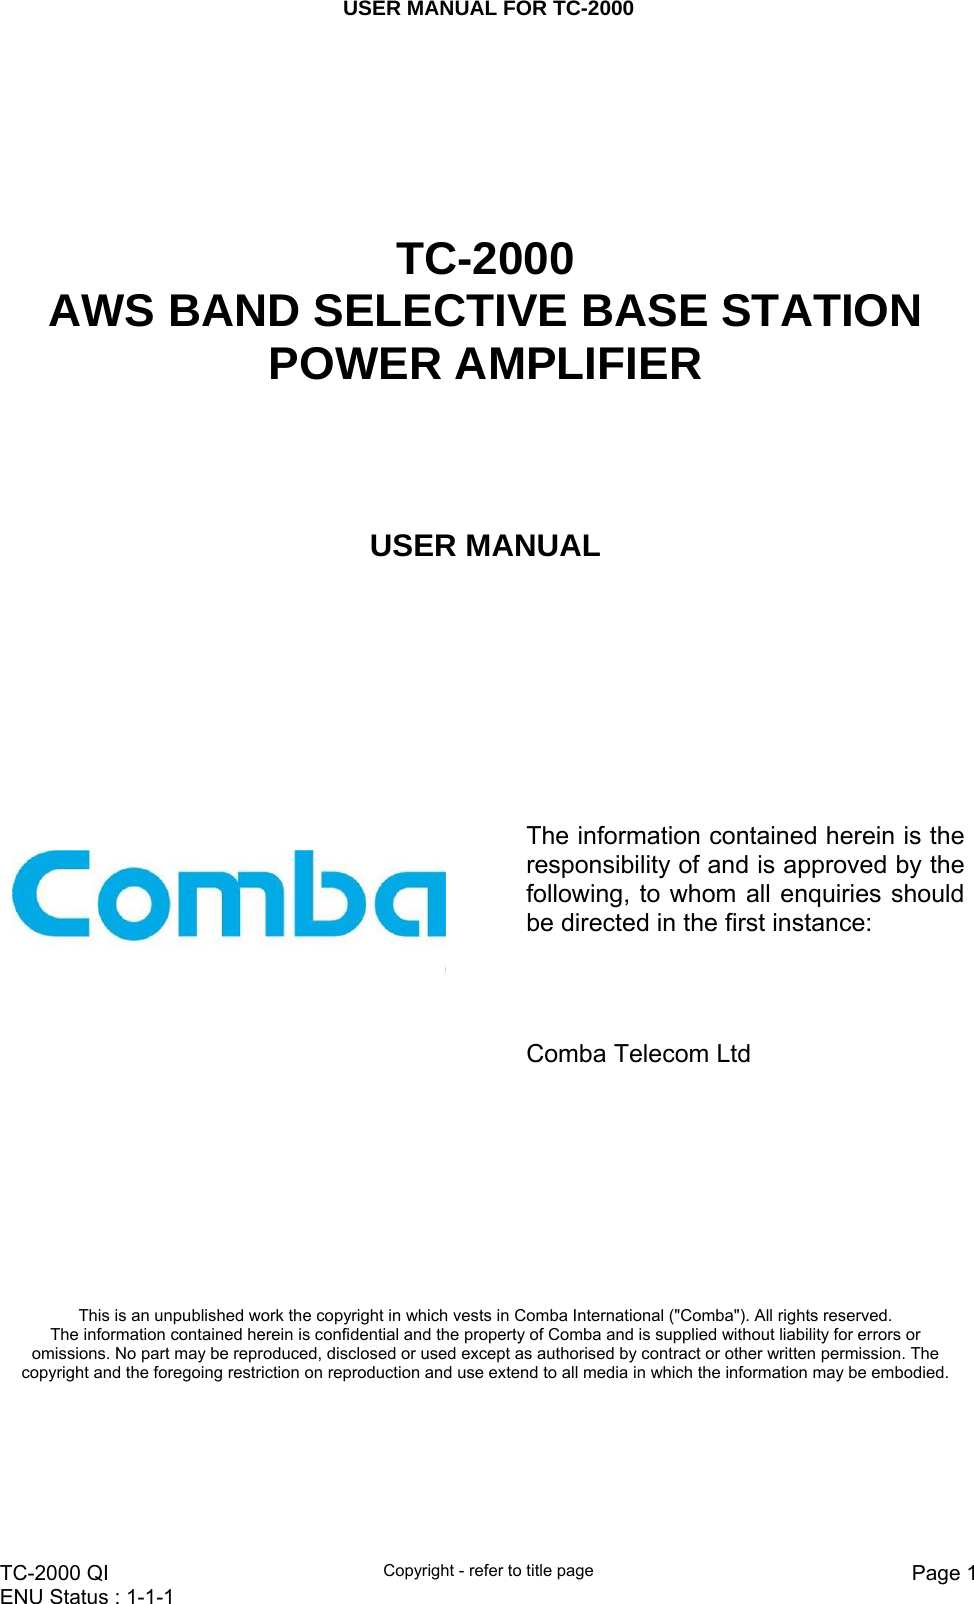 USER MANUAL FOR TC-2000   TC-2000 QI  Copyright - refer to title page  Page 1ENU Status : 1-1-1         TC-2000  AWS BAND SELECTIVE BASE STATION POWER AMPLIFIER  USER MANUAL        The information contained herein is the responsibility of and is approved by the following, to whom all enquiries should be directed in the first instance:              Comba Telecom Ltd This is an unpublished work the copyright in which vests in Comba International (&quot;Comba&quot;). All rights reserved. The information contained herein is confidential and the property of Comba and is supplied without liability for errors or omissions. No part may be reproduced, disclosed or used except as authorised by contract or other written permission. The copyright and the foregoing restriction on reproduction and use extend to all media in which the information may be embodied. 